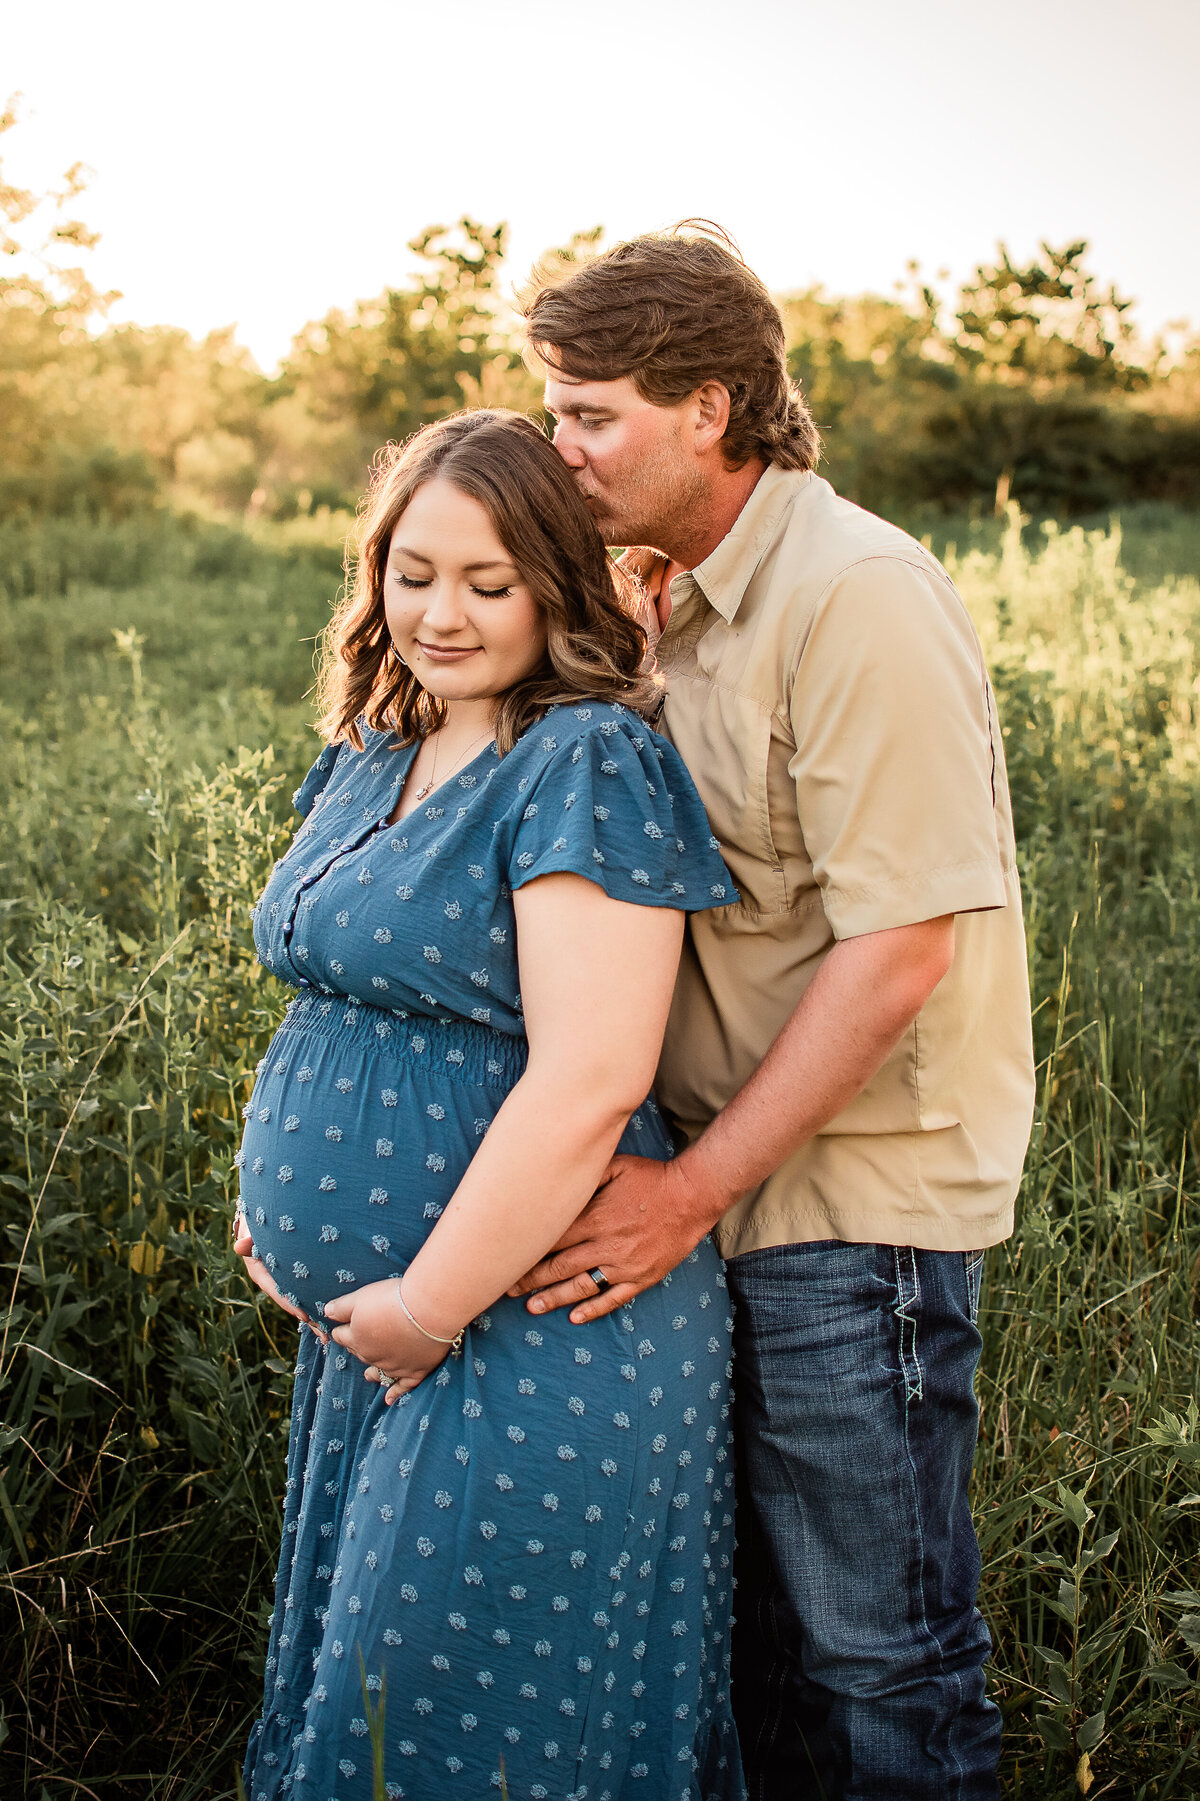 An expectant father stands behind his wife and kisses her head as she holds her belly.